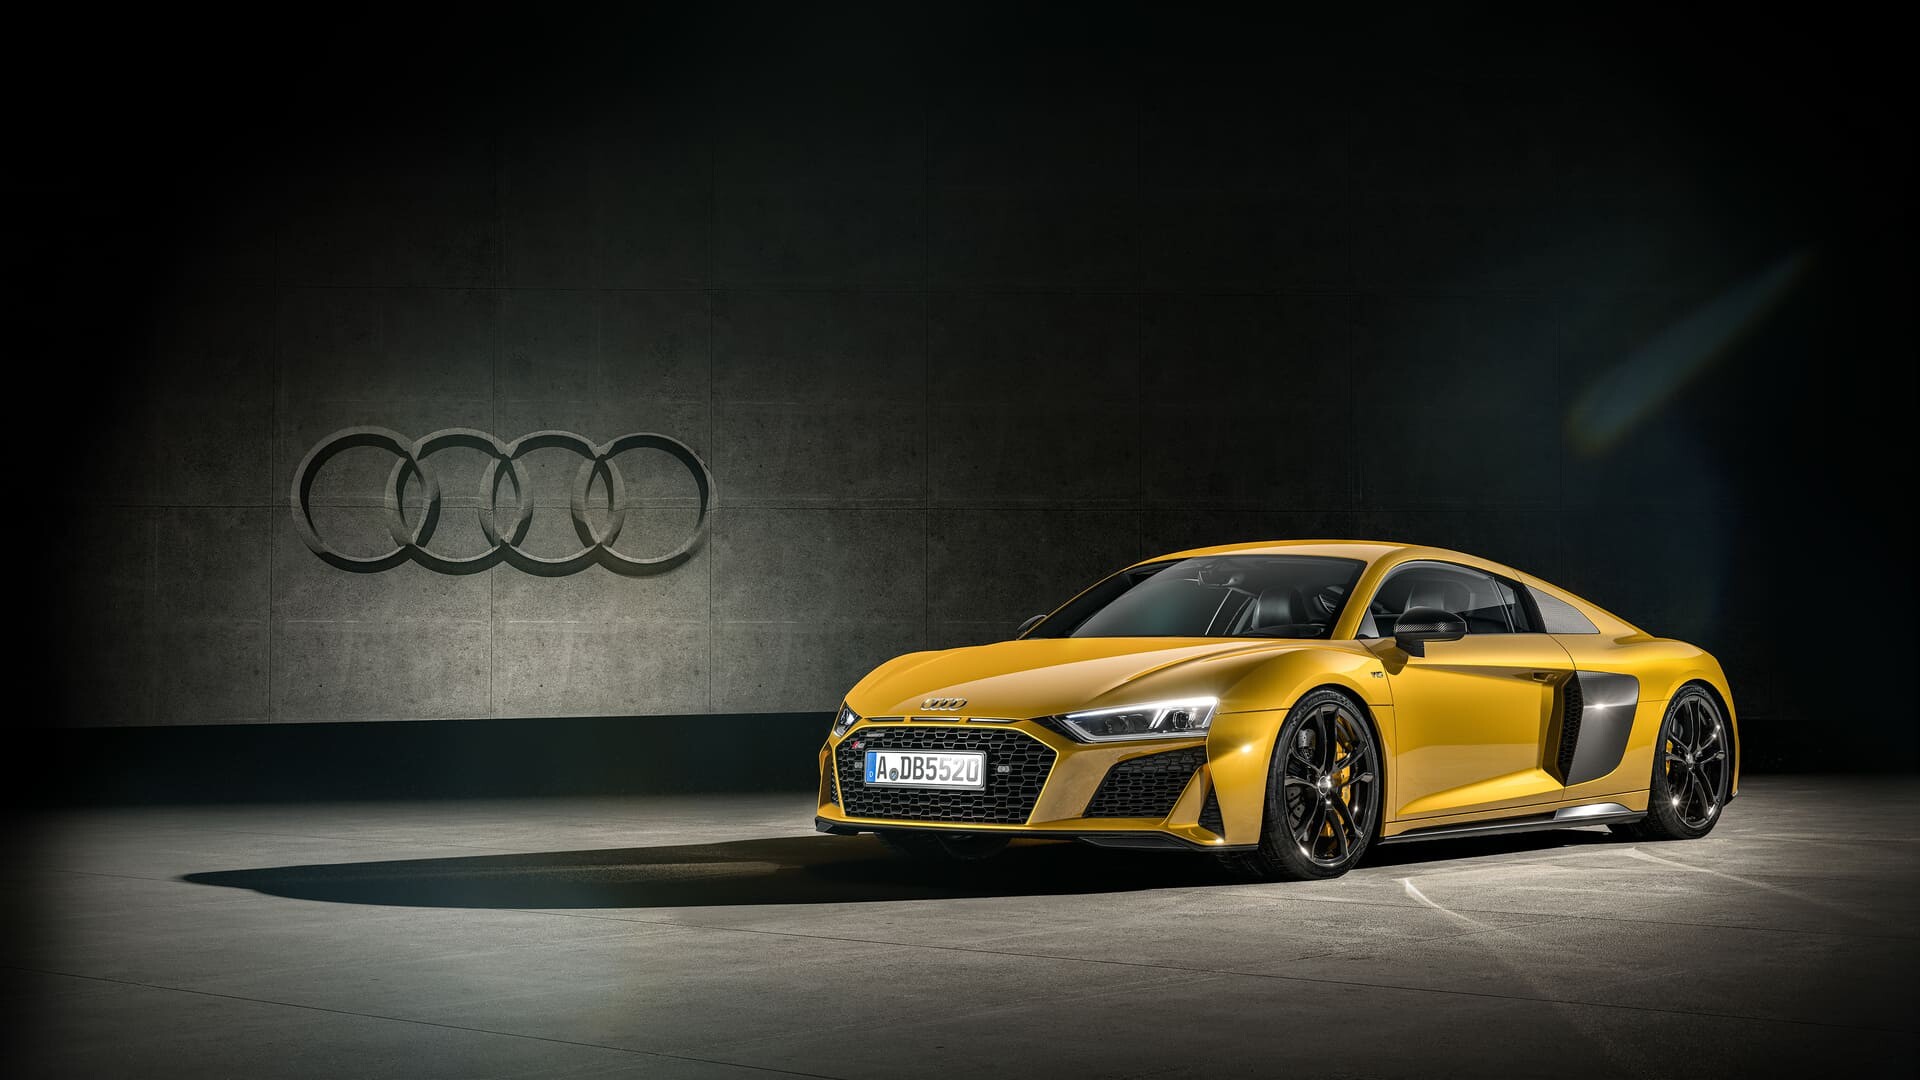 Audi: A long-established, superior car manufacturer, Known for the logo of four rings. 1920x1080 Full HD Wallpaper.